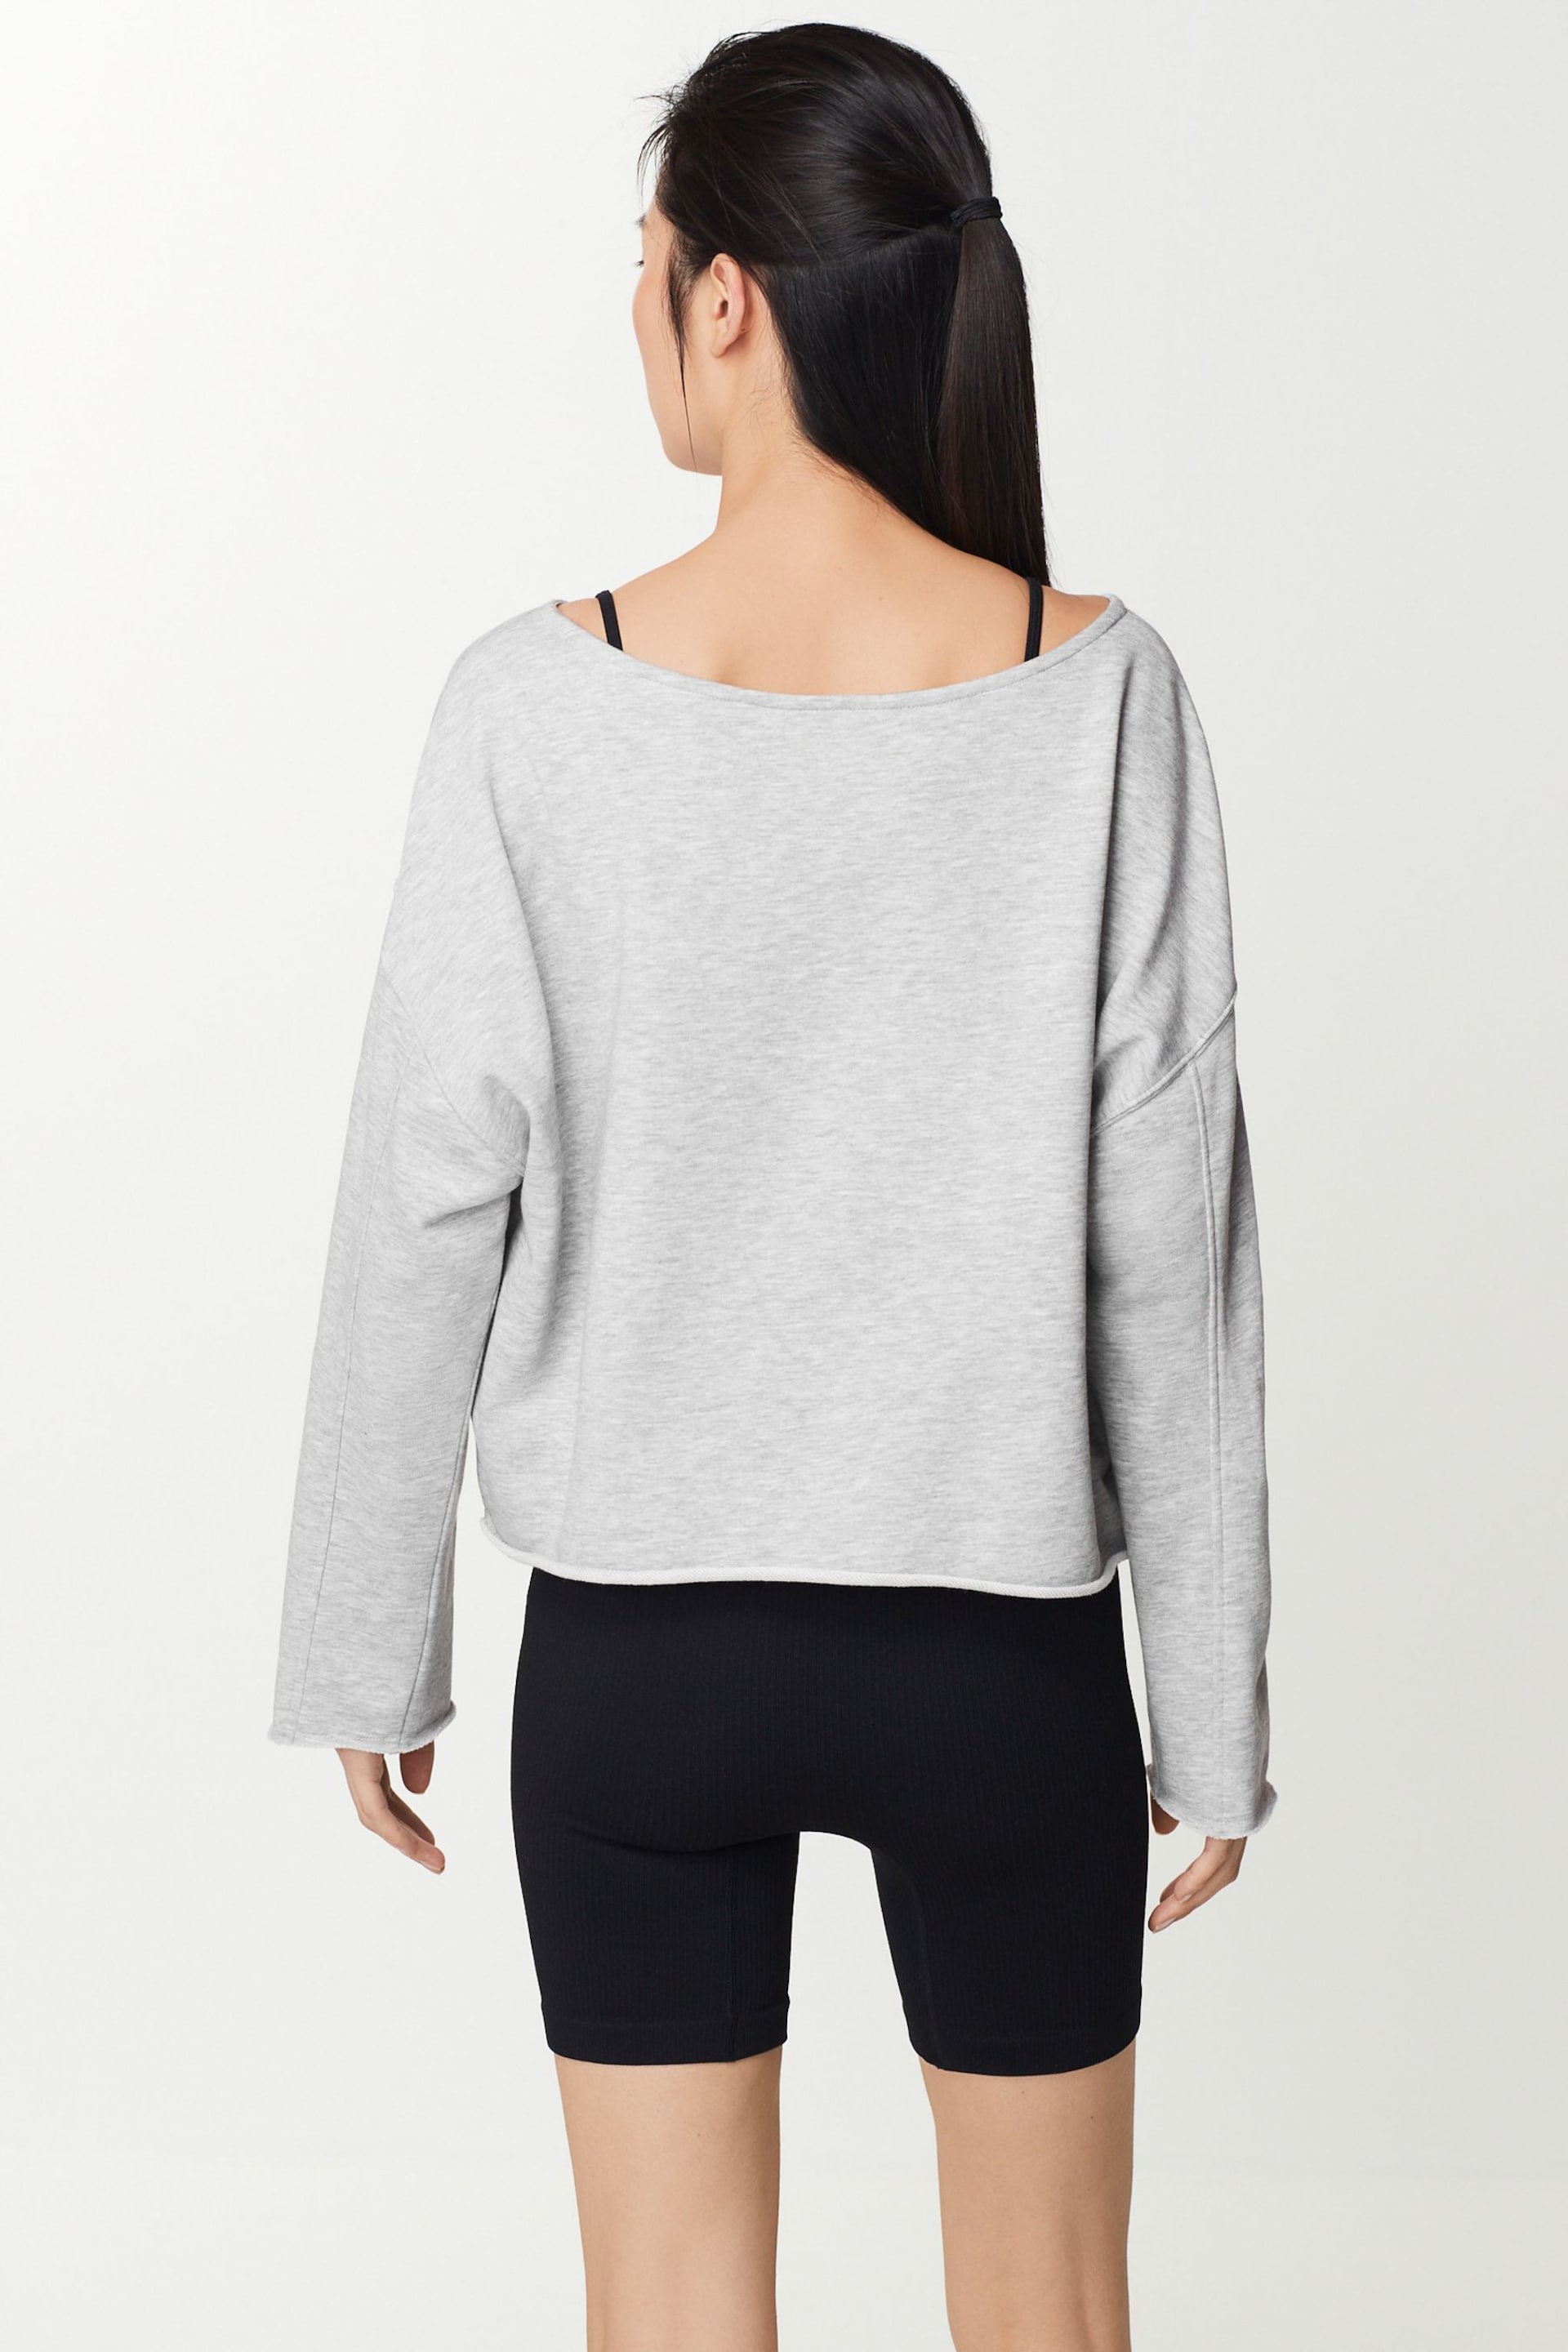 Grey Relaxed Fit Slouch Sweat Top - Image 4 of 7